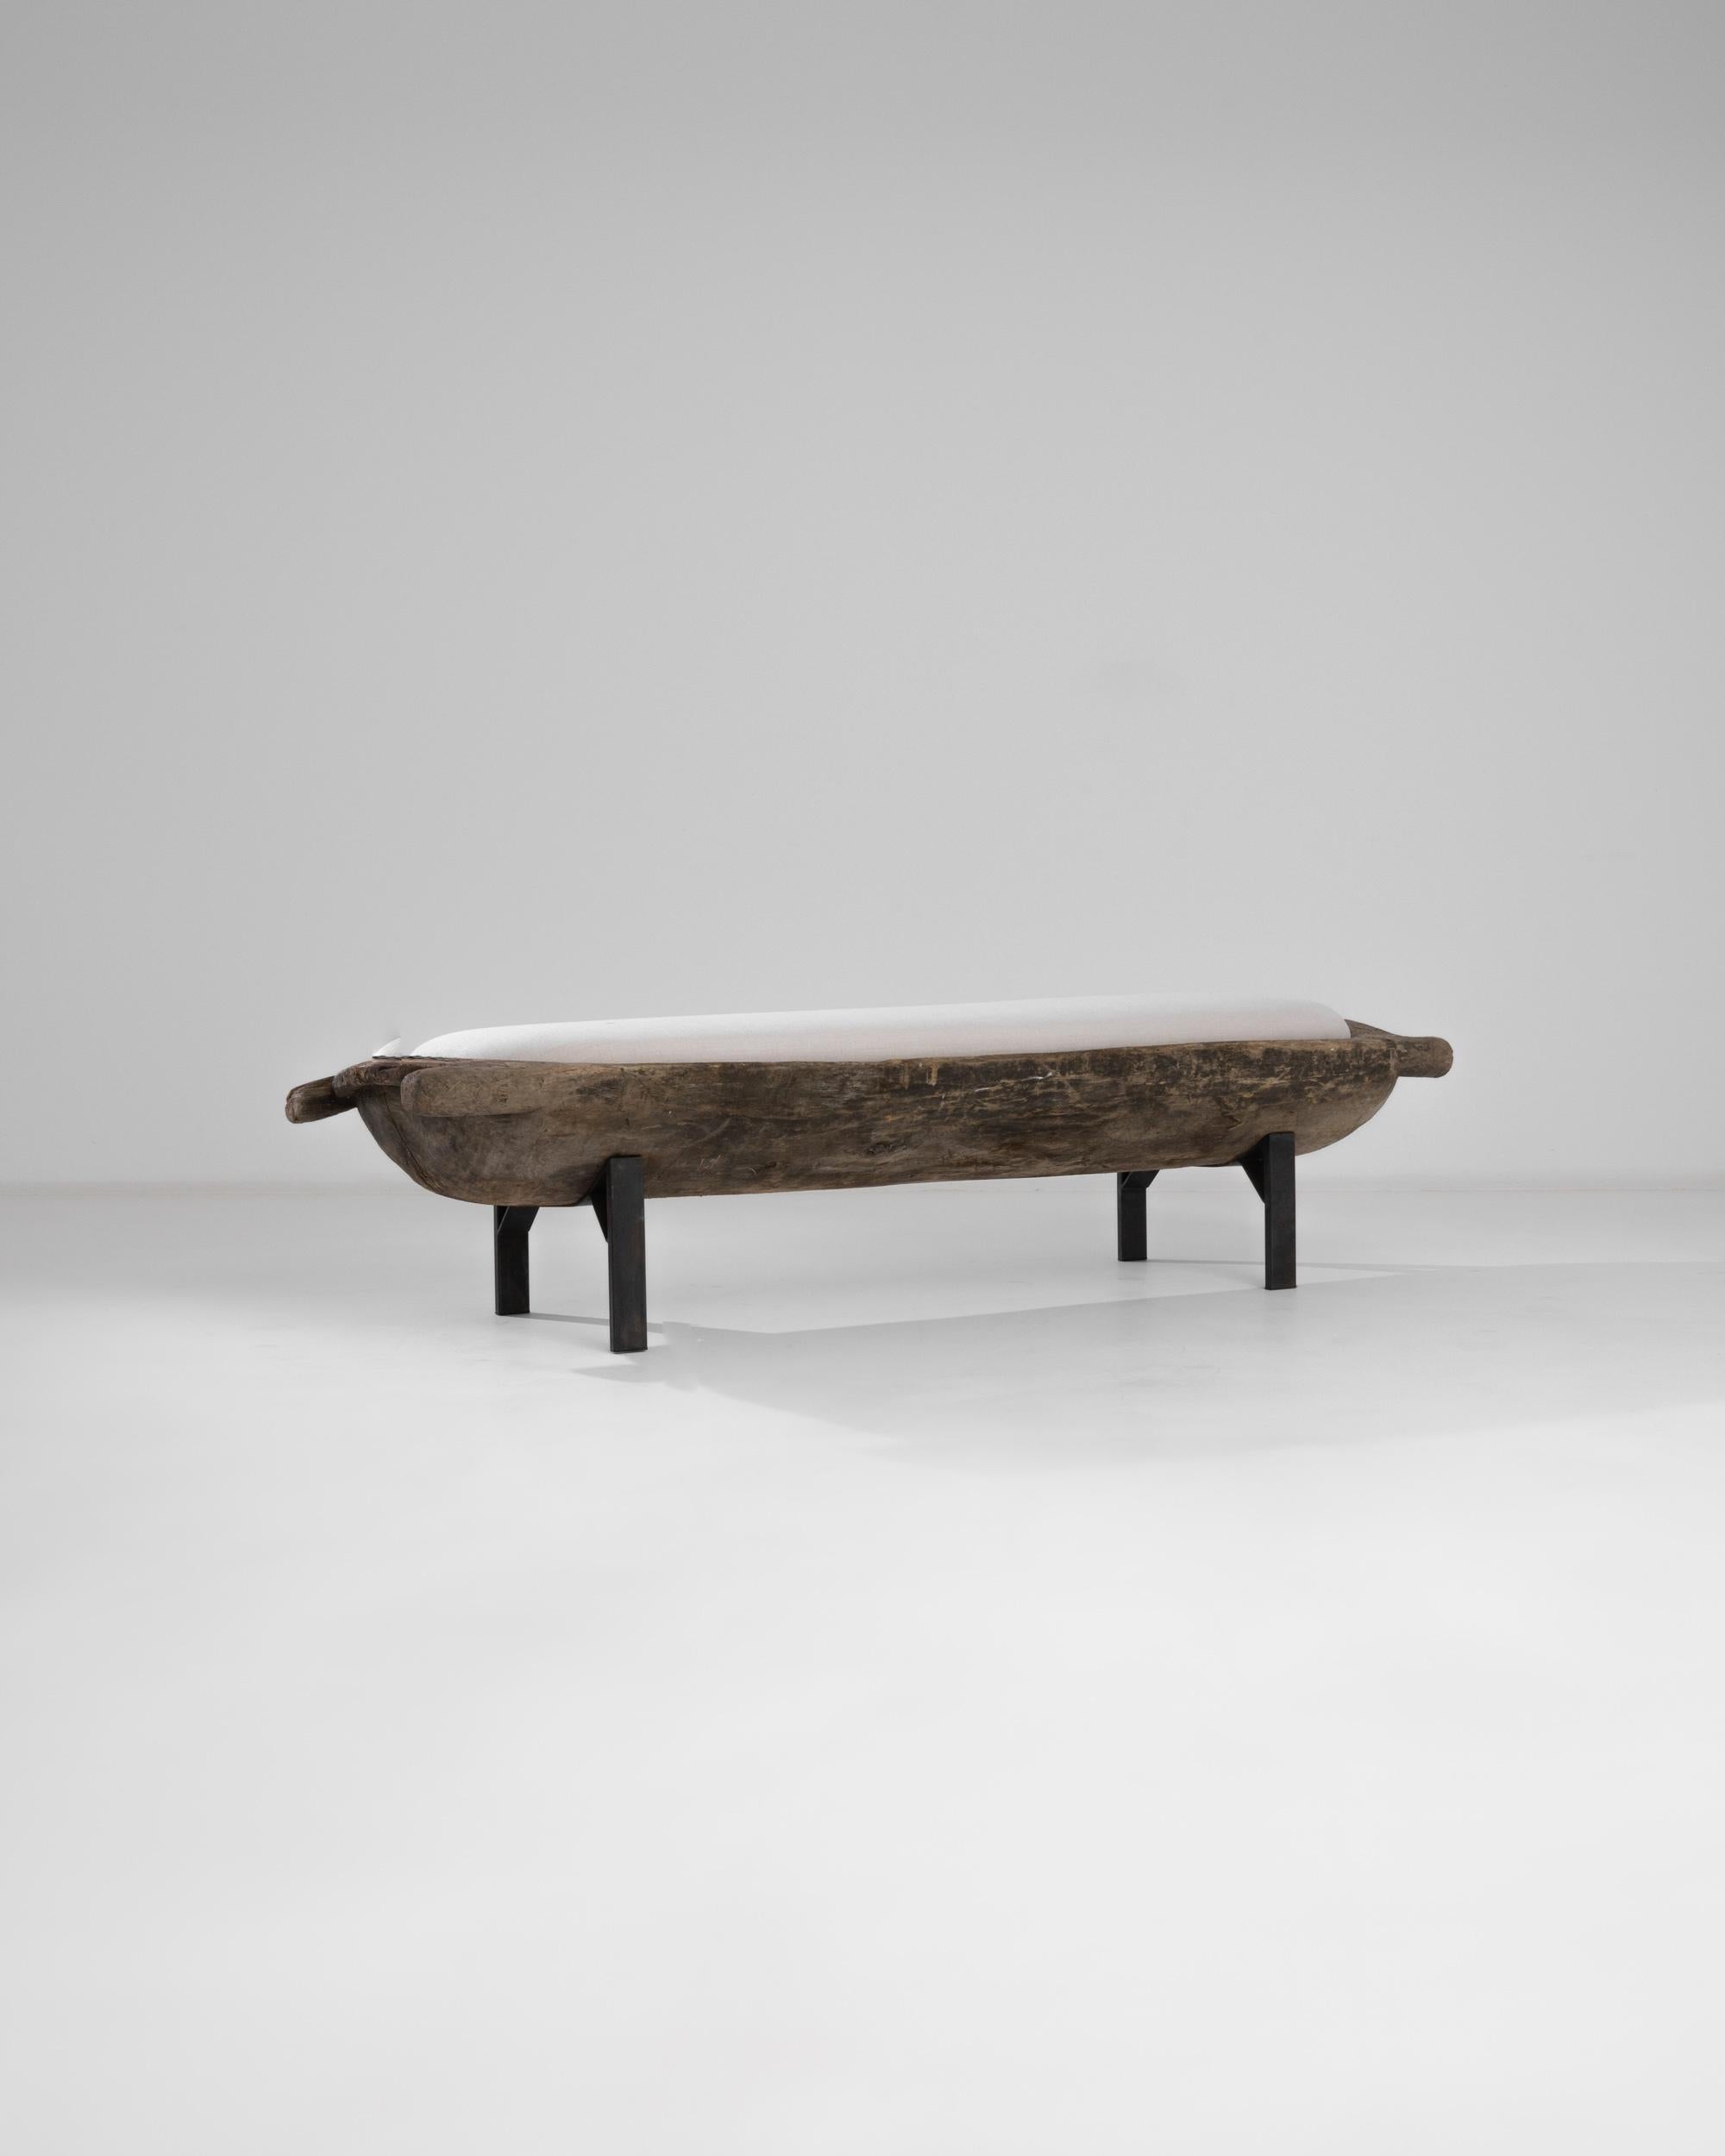 Polish 19th Century Wooden Bench with Upholstered Seat